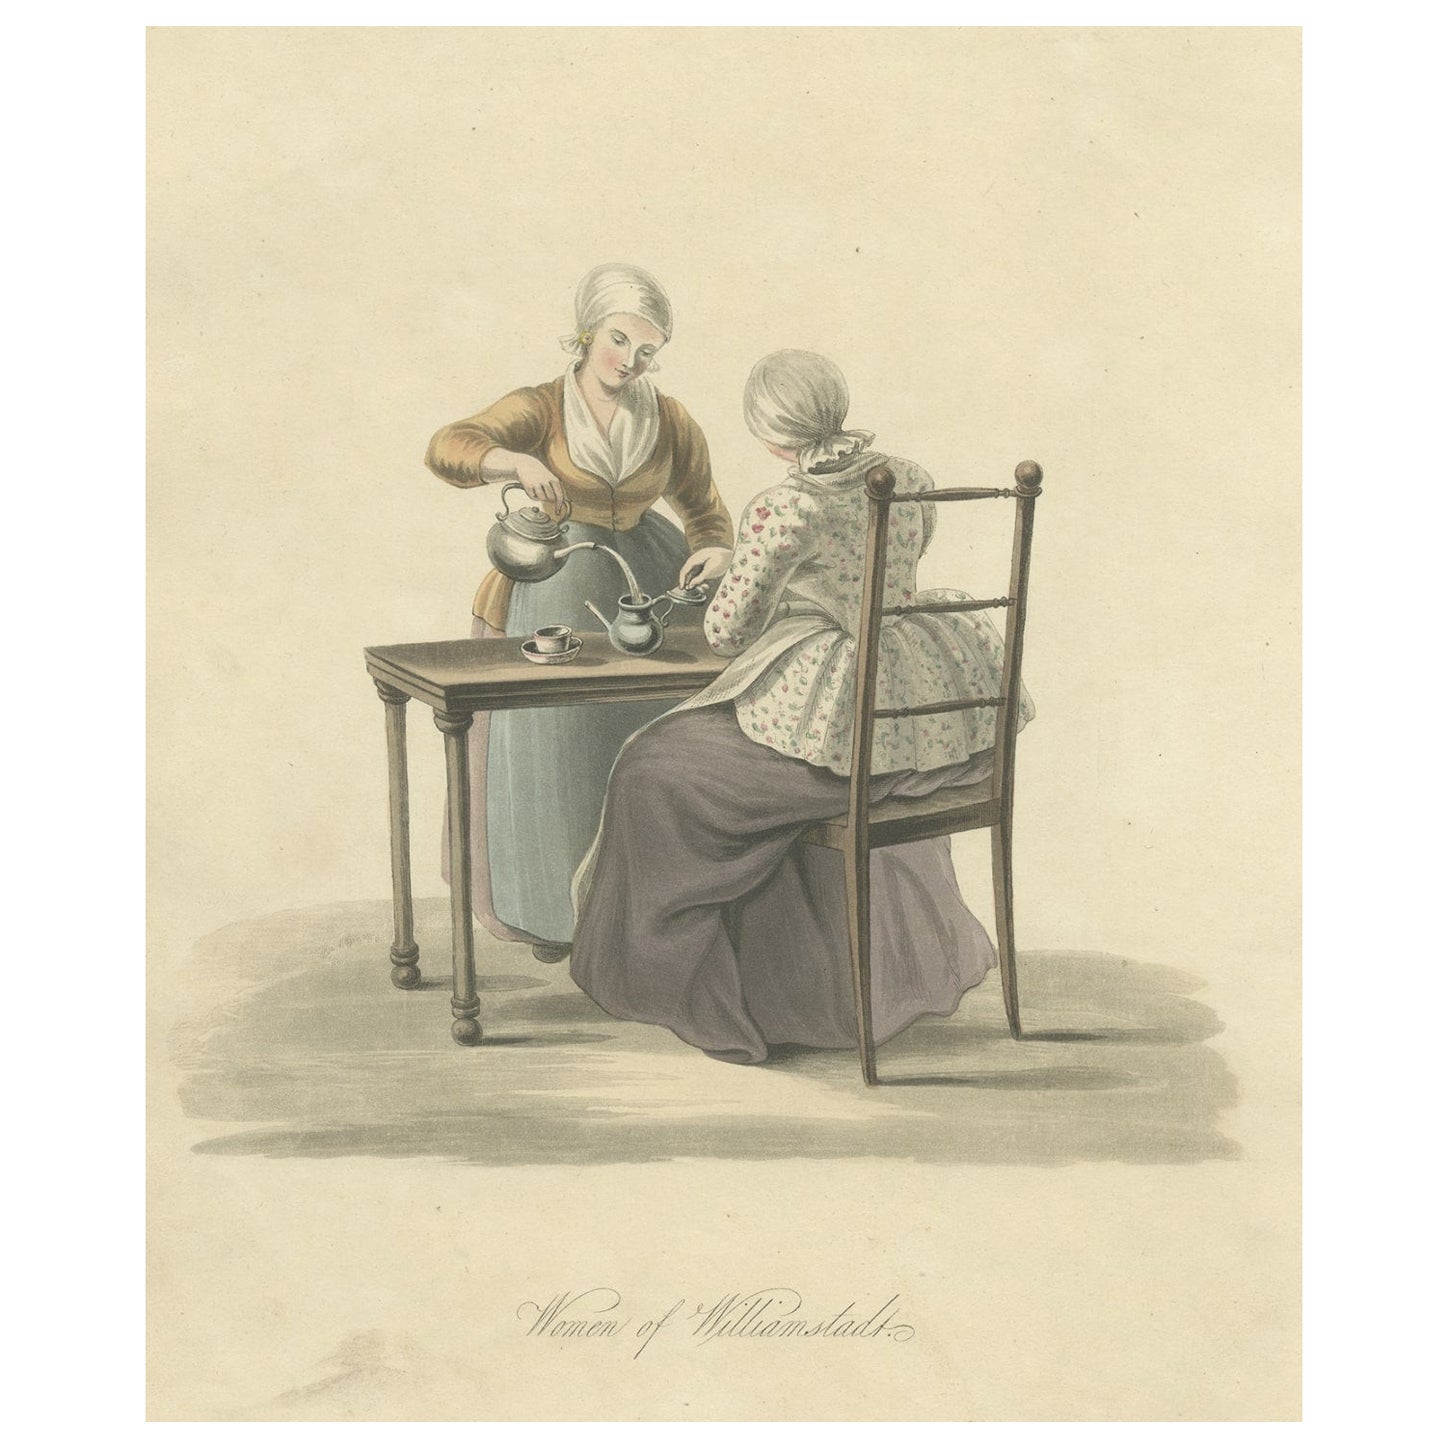 Old Print of Women of Willemstad in Brabant, the Netherlands, Drinking Tea, 1817 For Sale